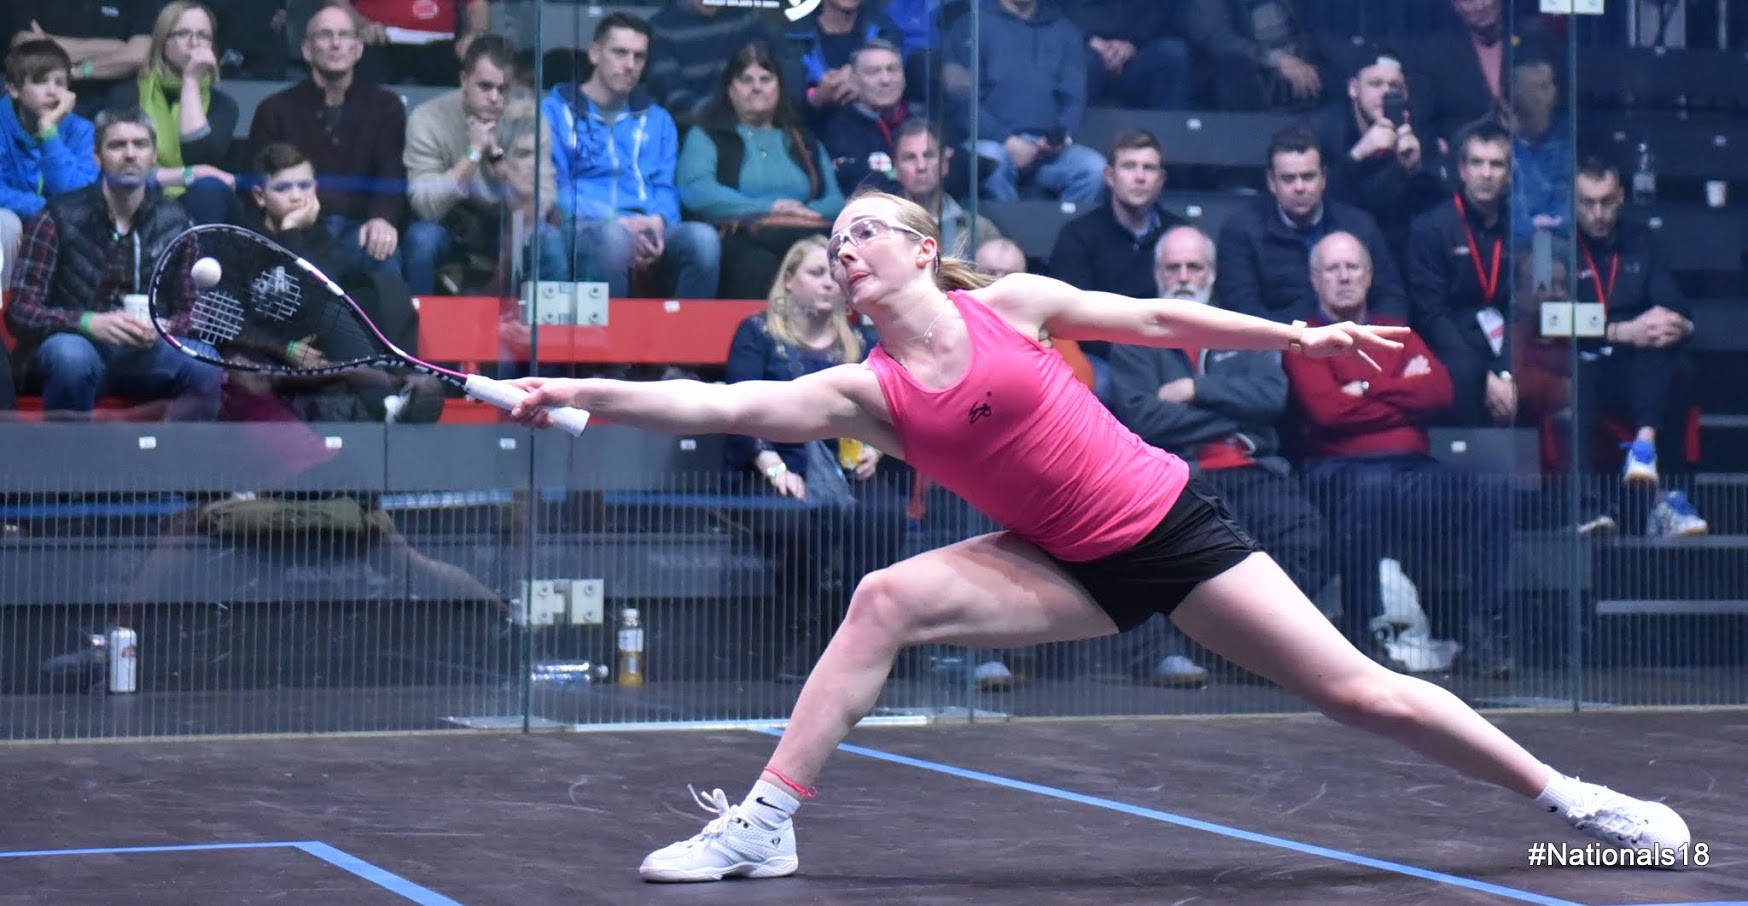 Lucy Turmel in a match on a glass court